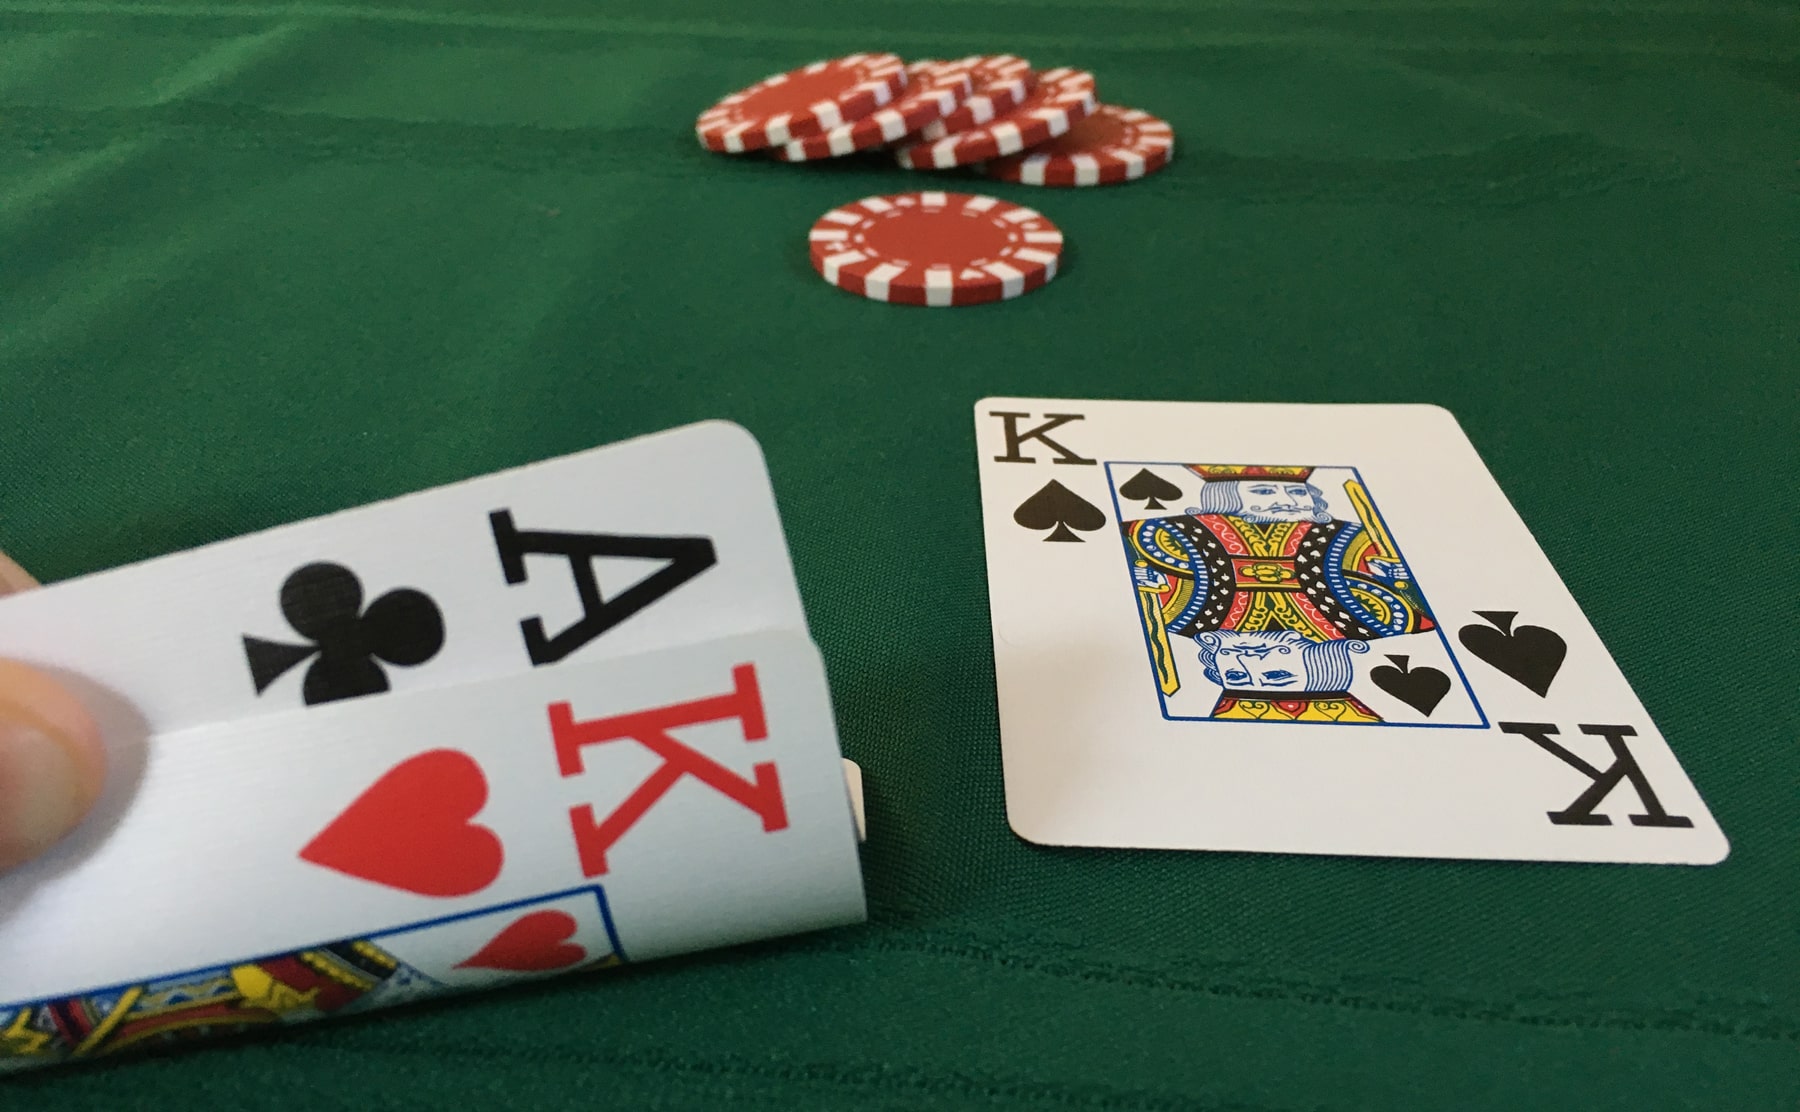 About Online Poker Gaming